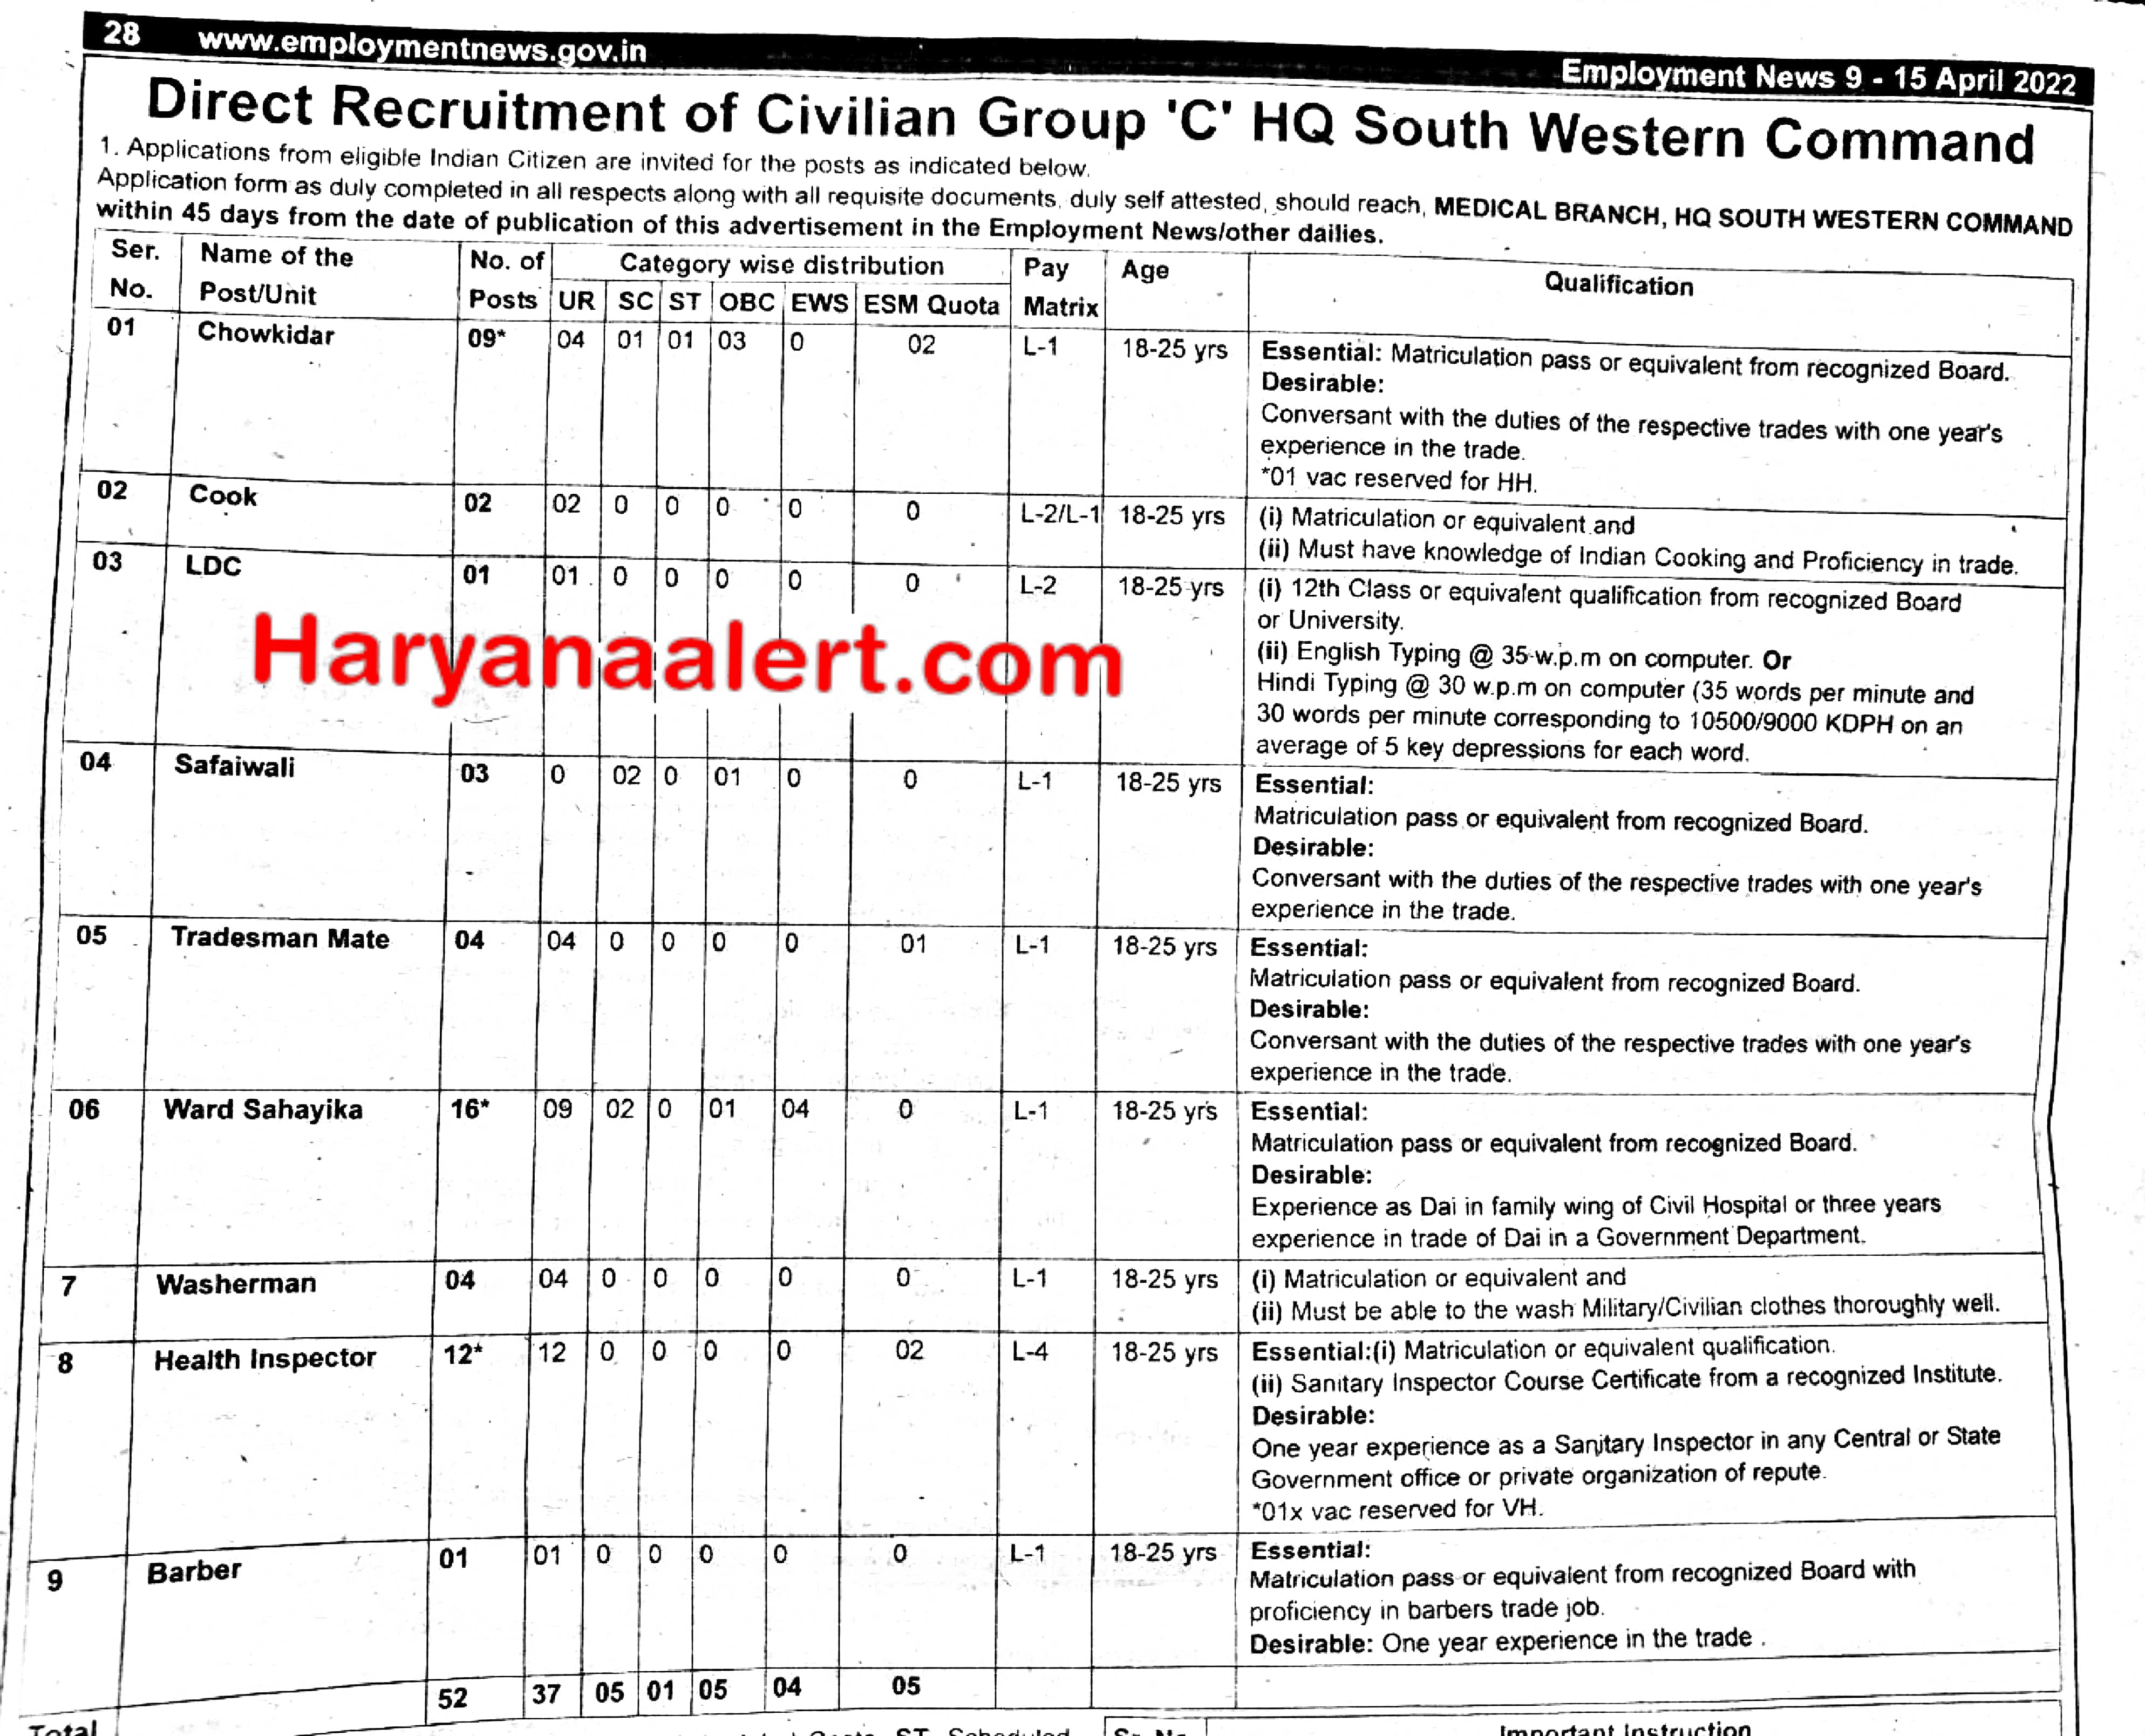 Army HQ South Western Command Group C Vacancy 2022